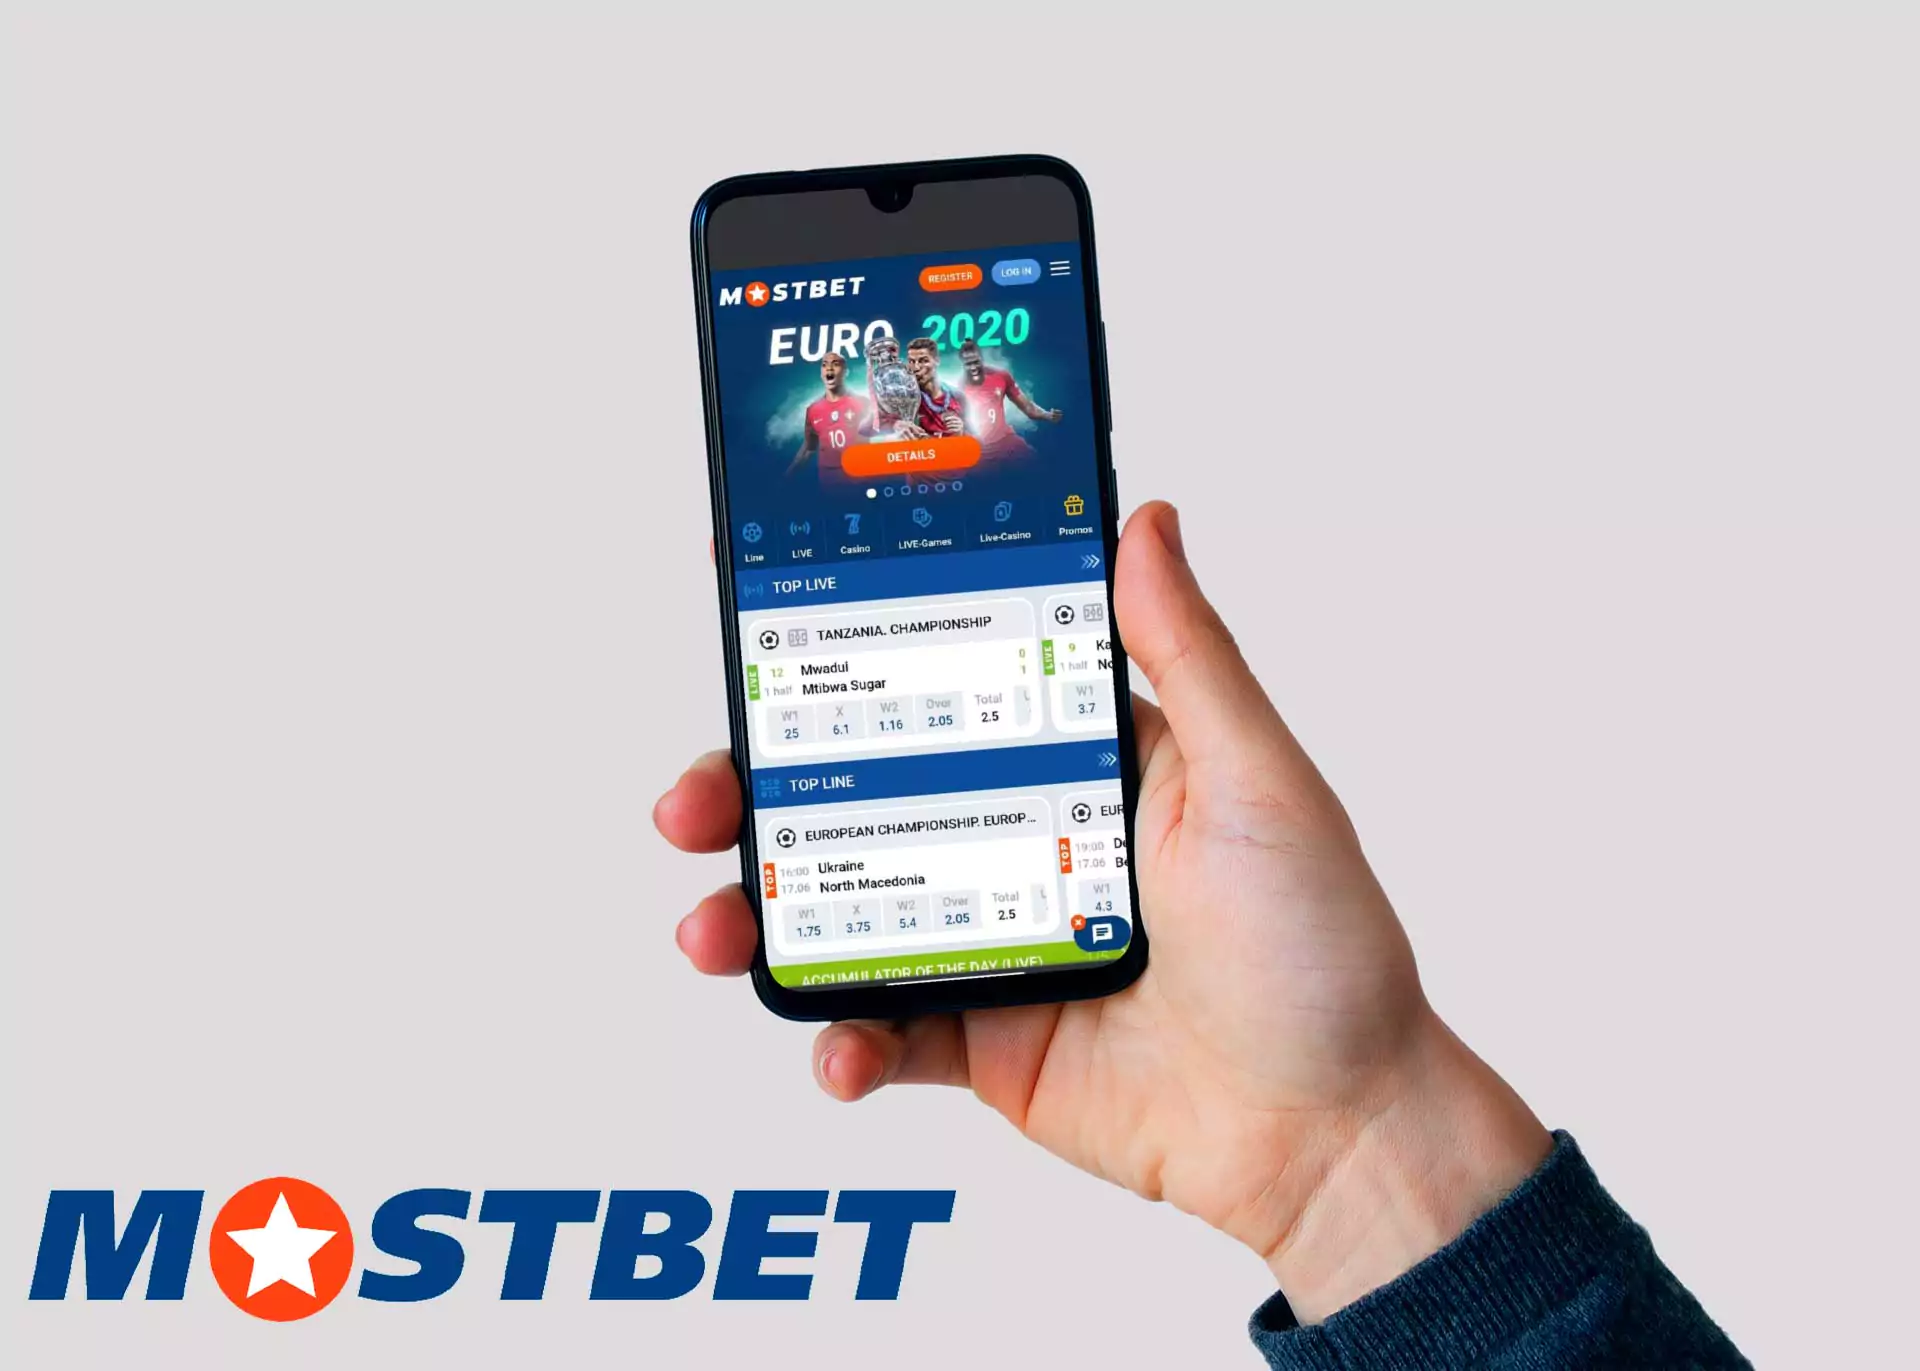 Go to the official website of Mostbet through any mobile browser.